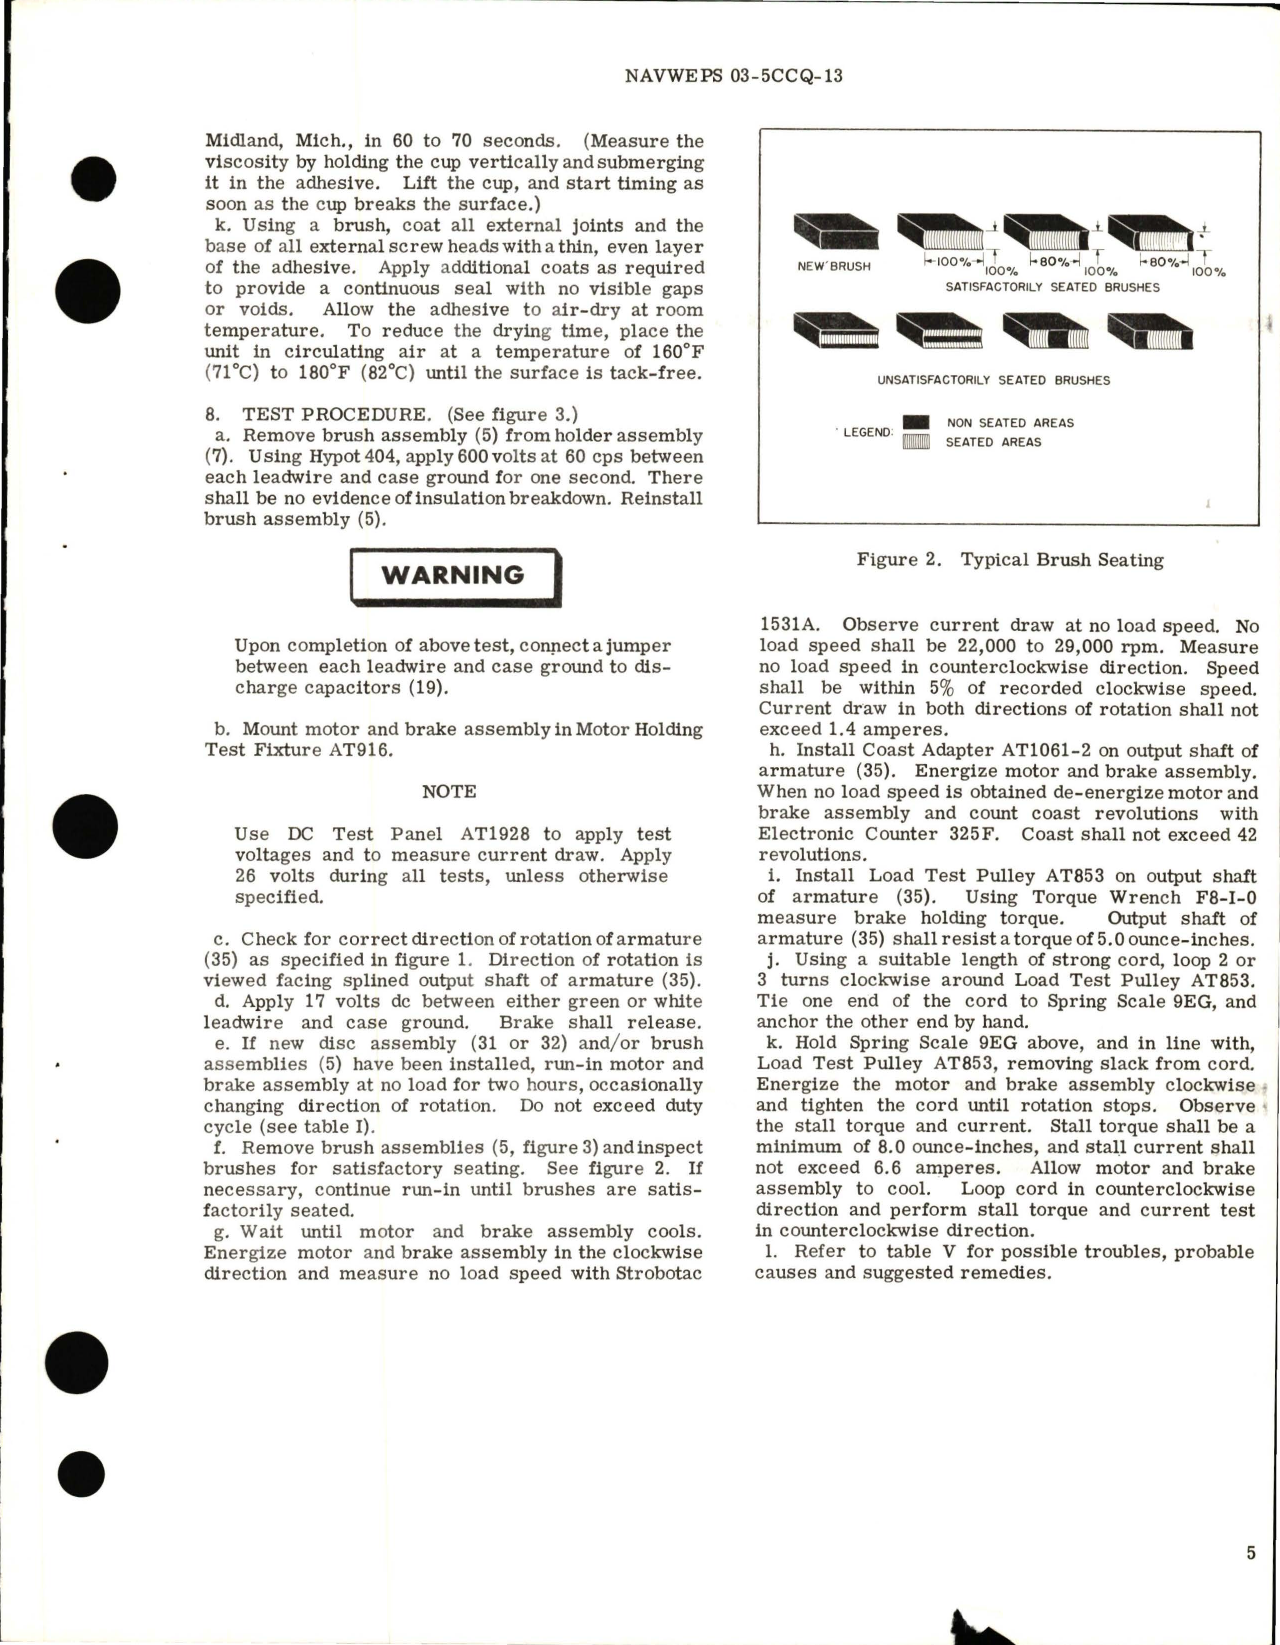 Sample page 5 from AirCorps Library document: Overhaul Instructions with Parts Breakdown for Motor and Brake Assembly - Model E1600M3